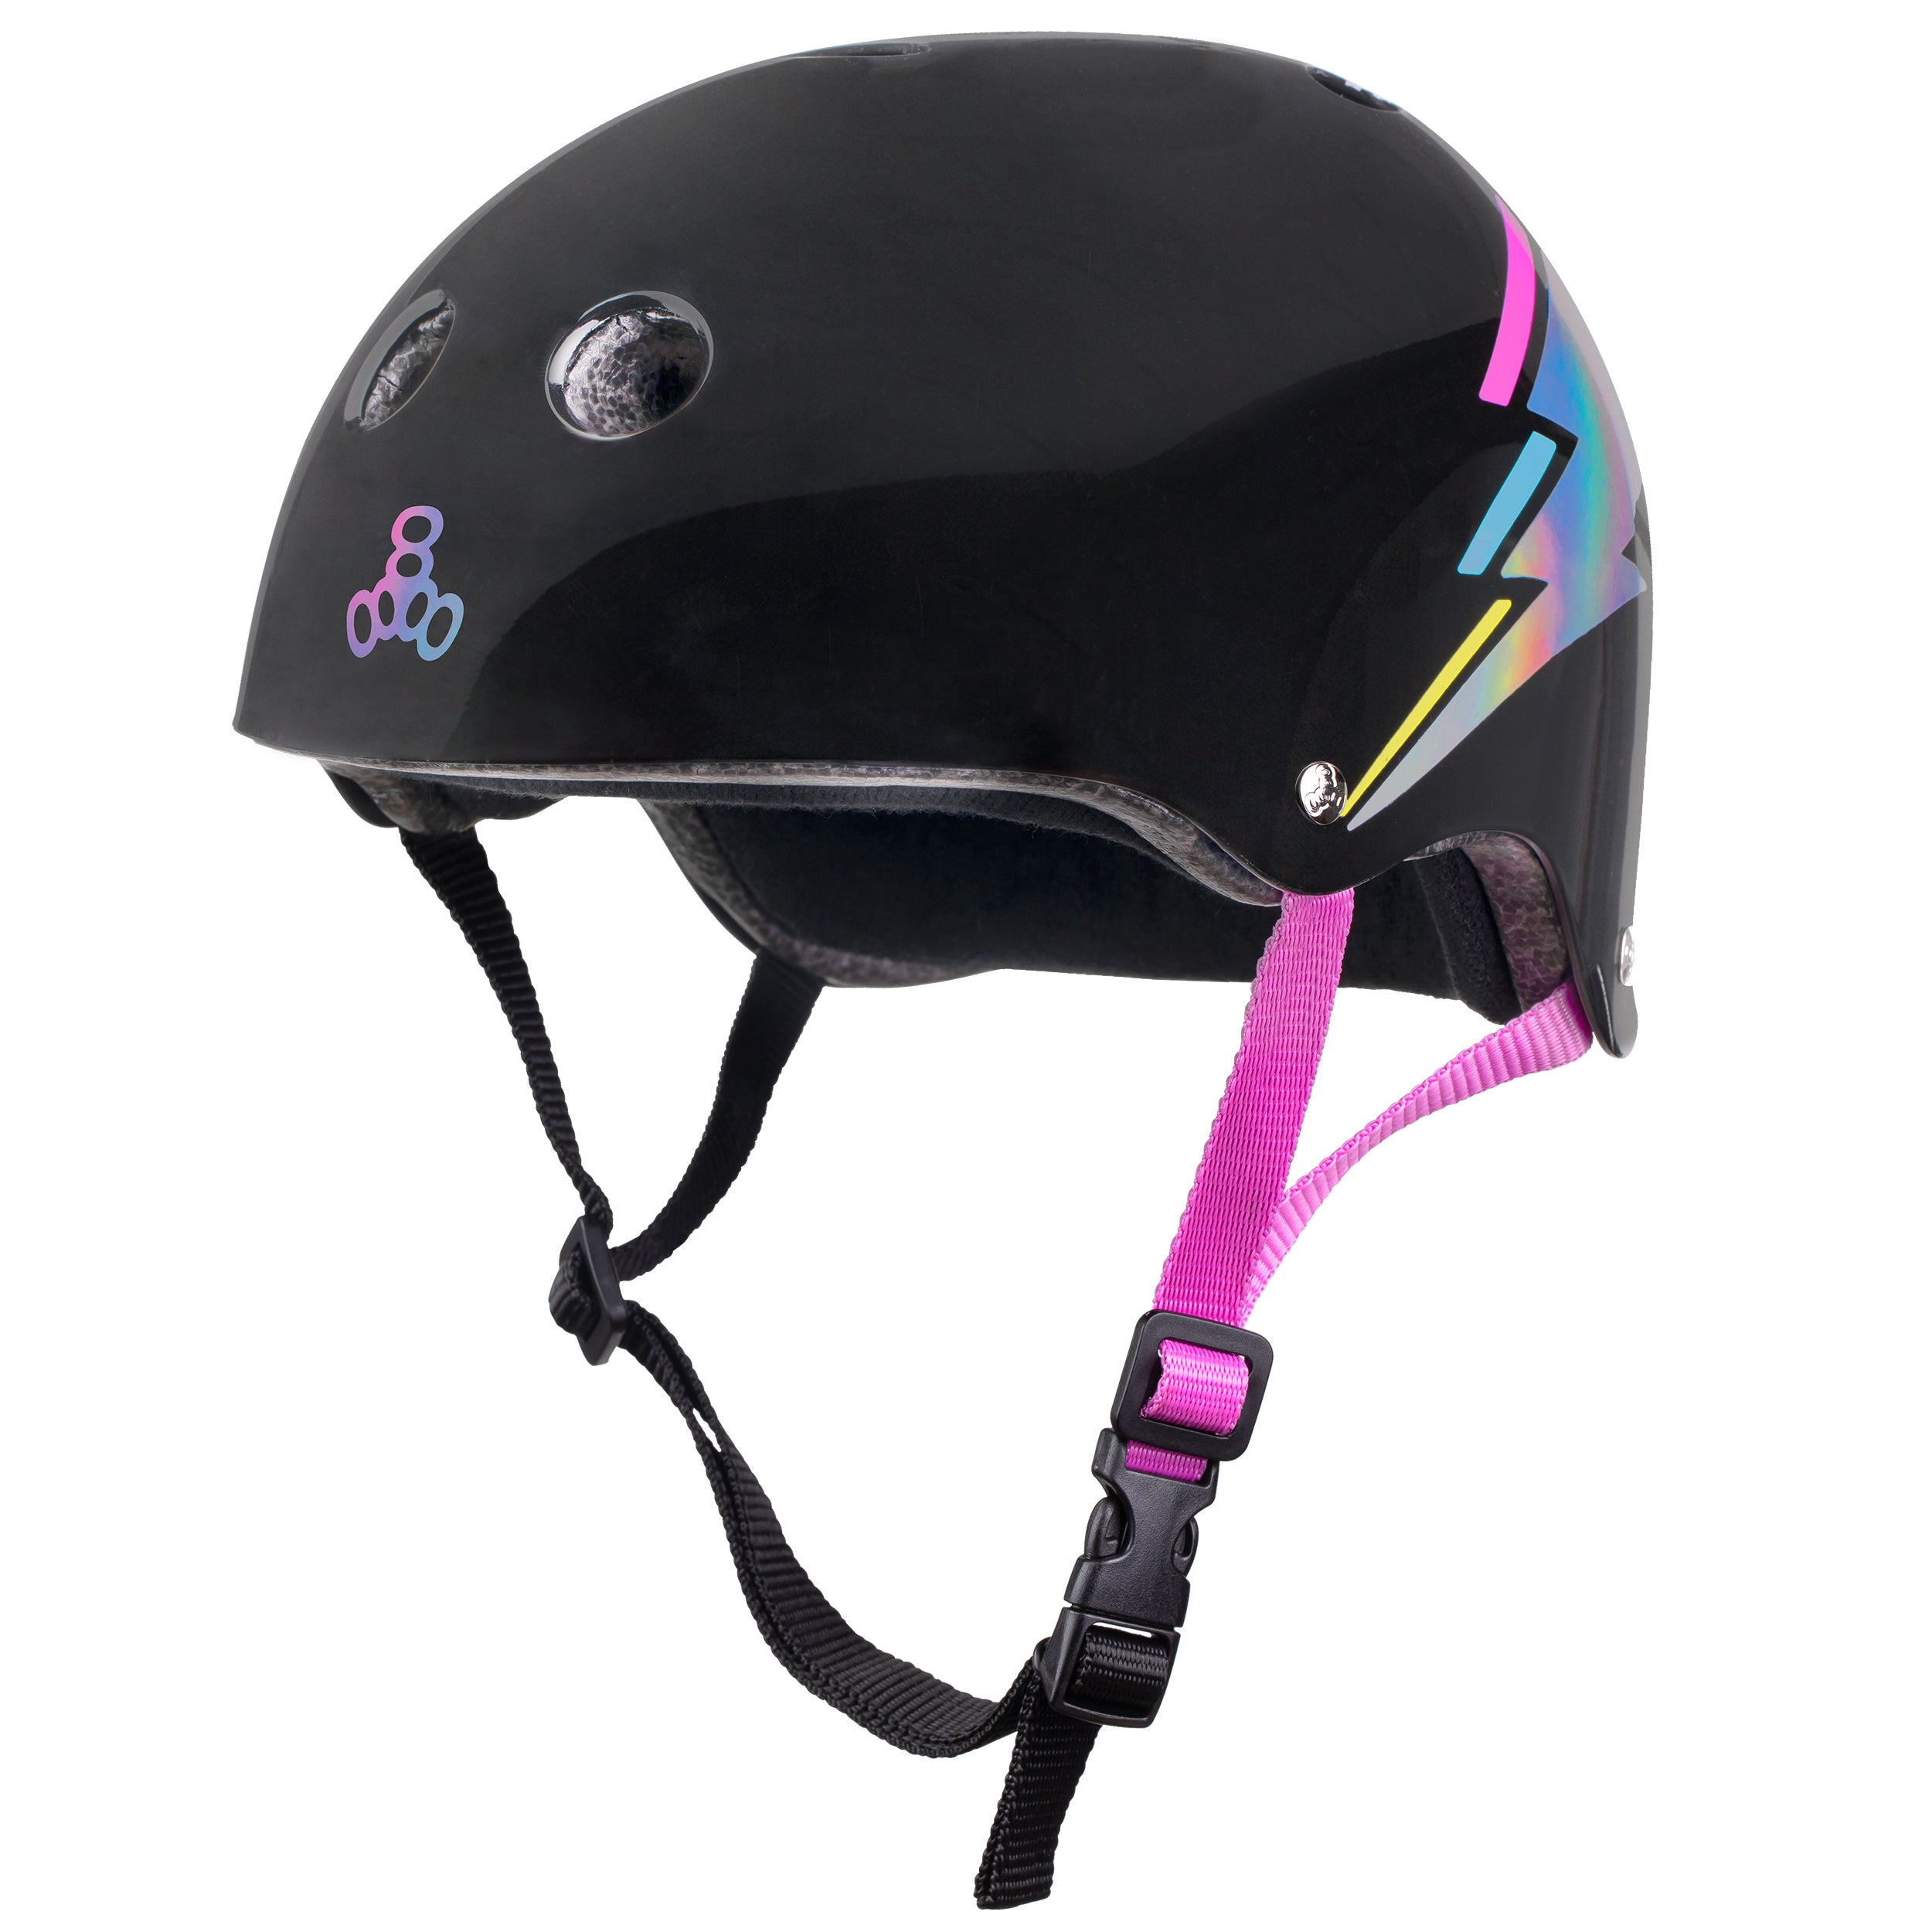 Triple 8 Eight - THE Certified SS Helmet - Black Hologram - Ion Dna